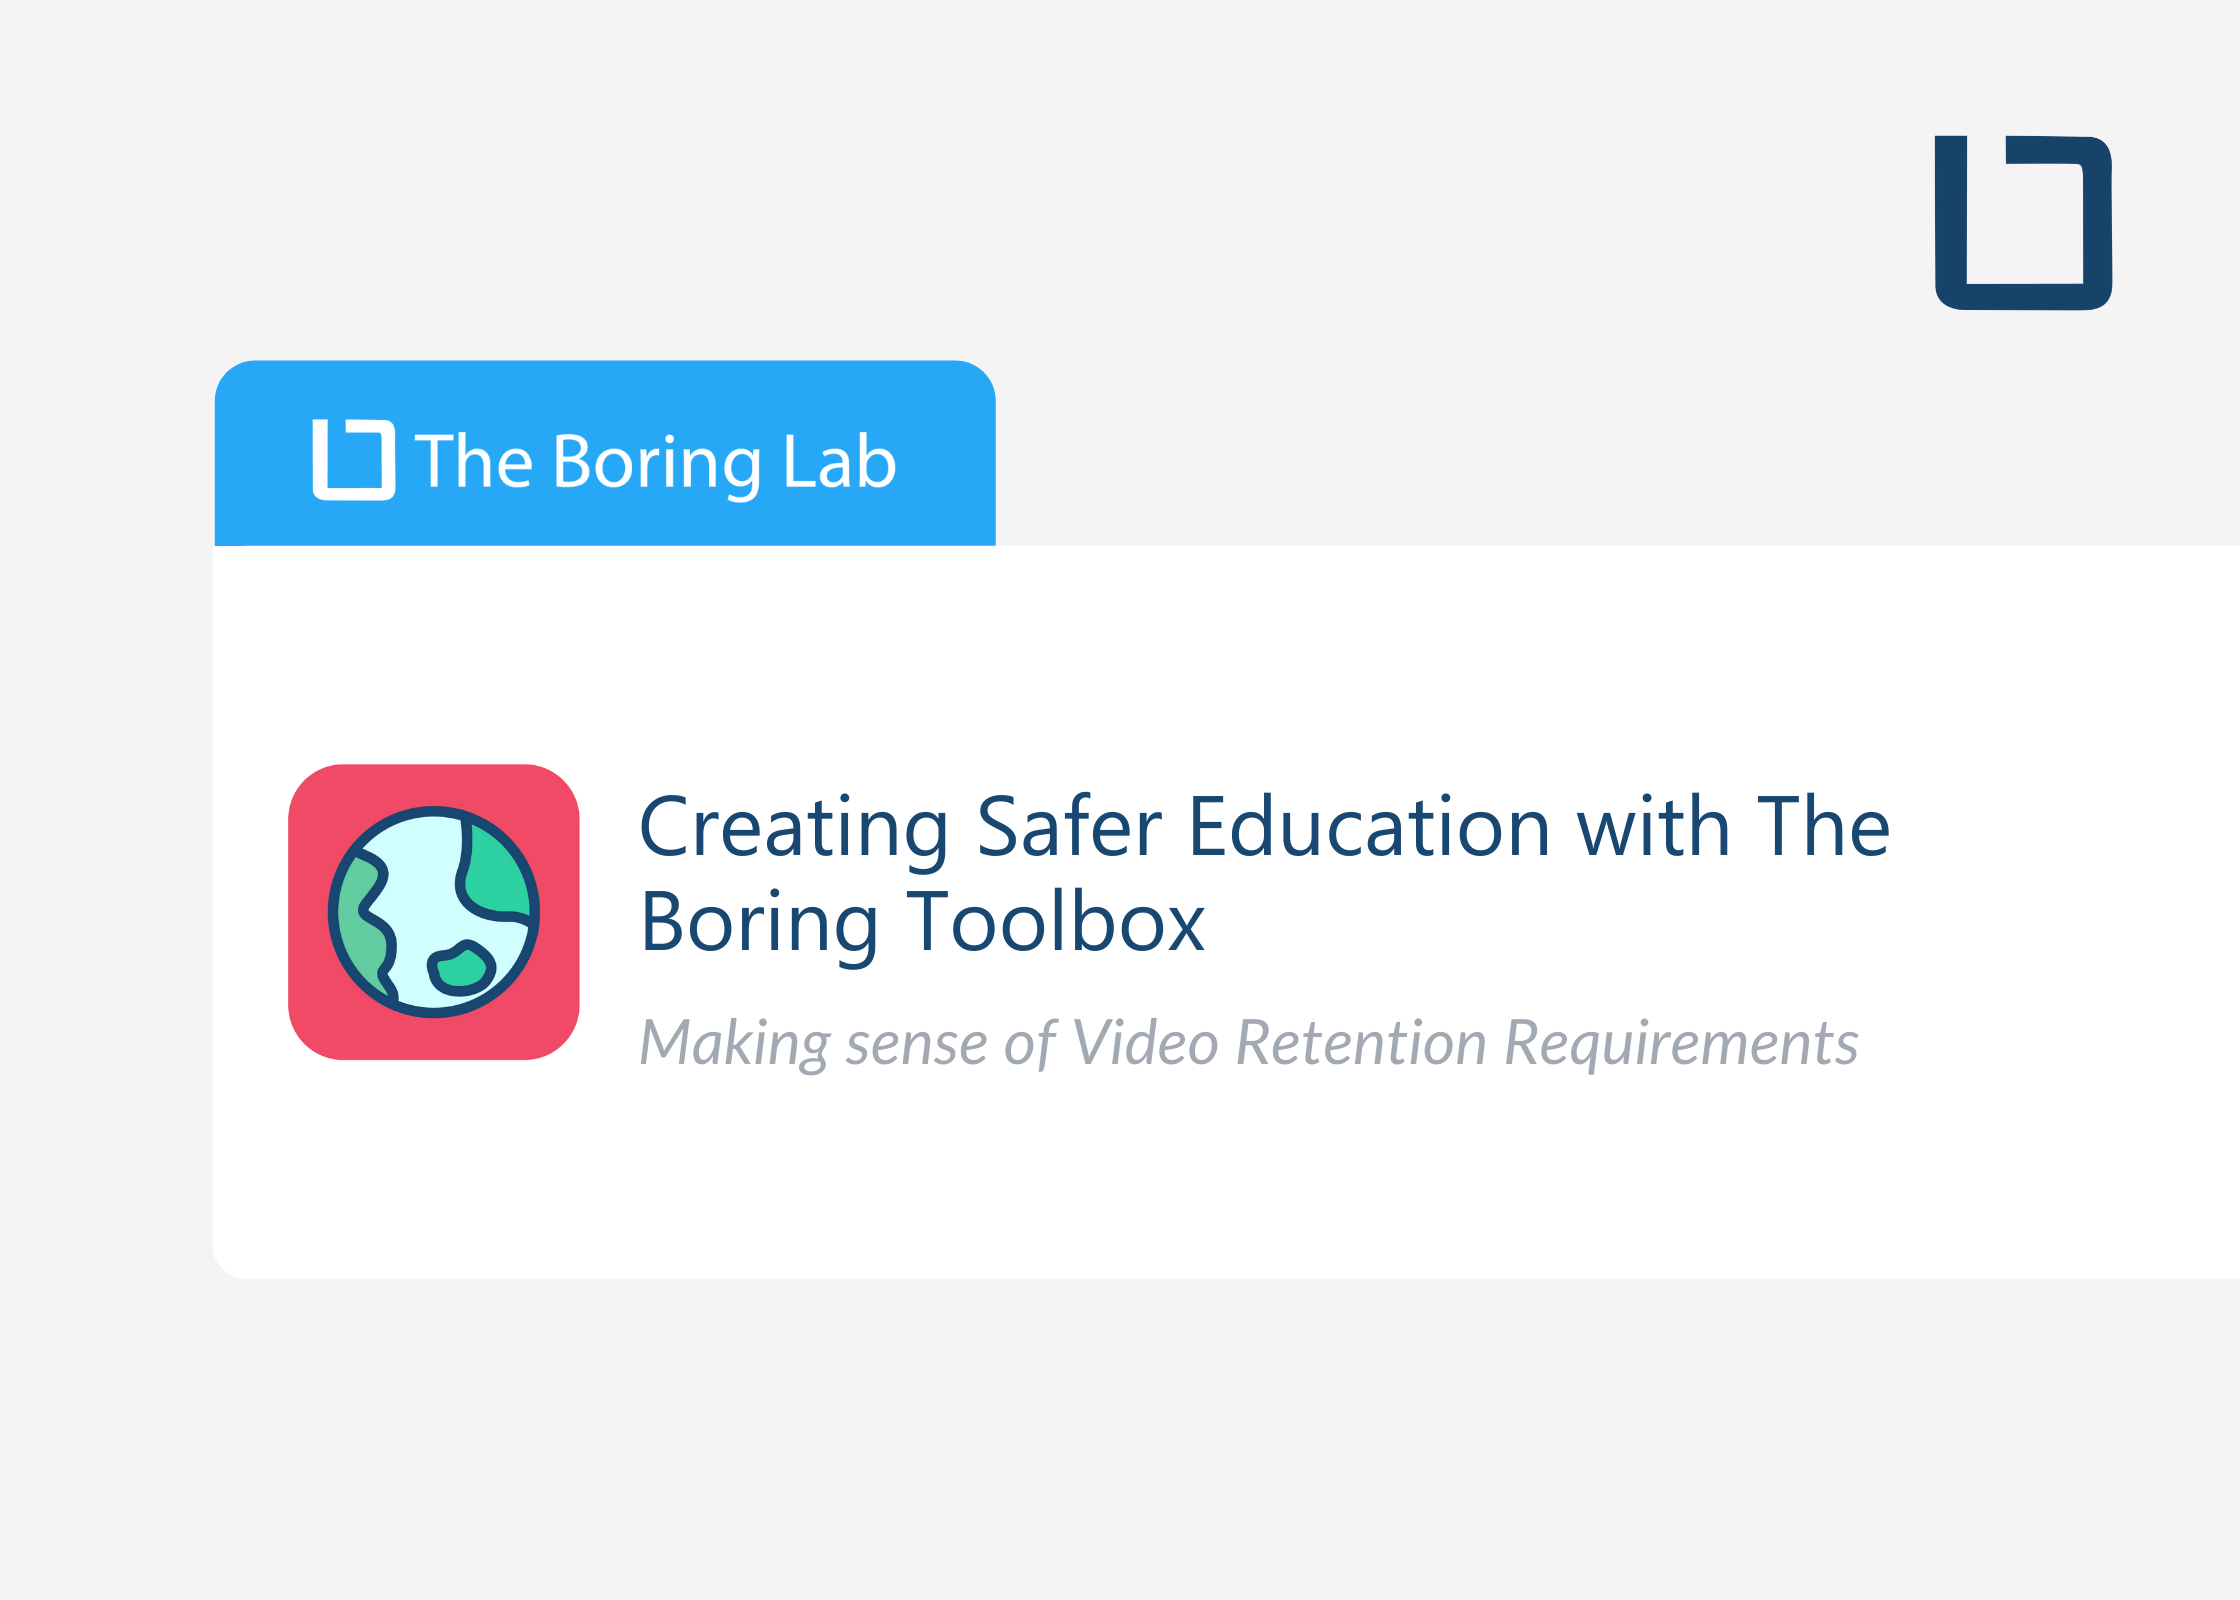 Creating Safer Education with The Boring Toolbox